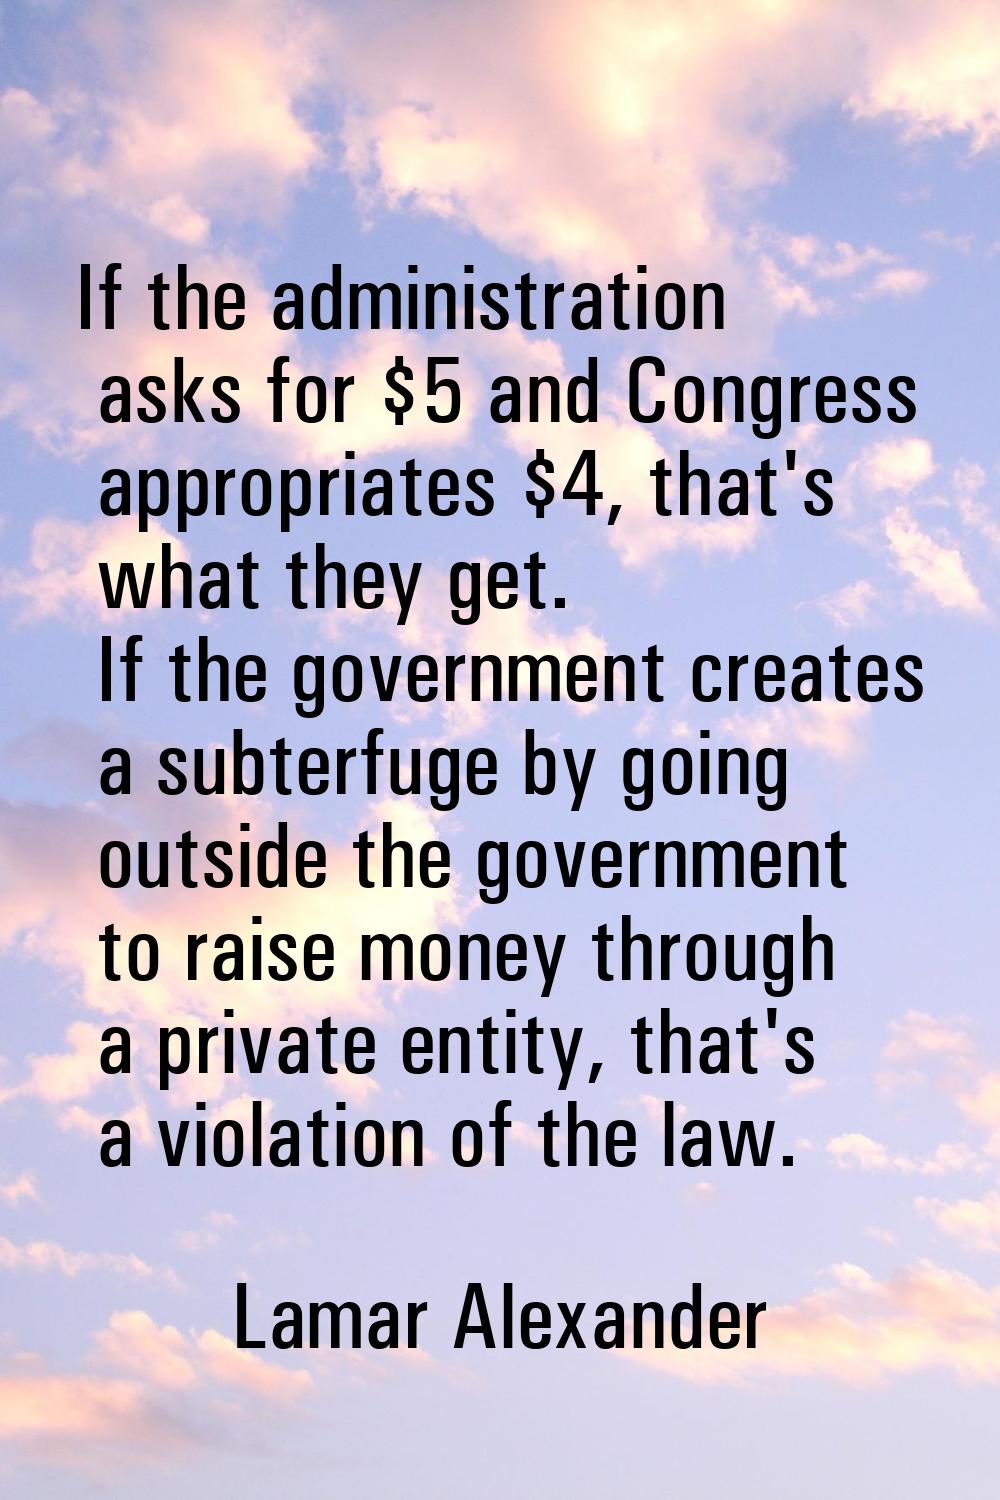 If the administration asks for $5 and Congress appropriates $4, that's what they get. If the govern